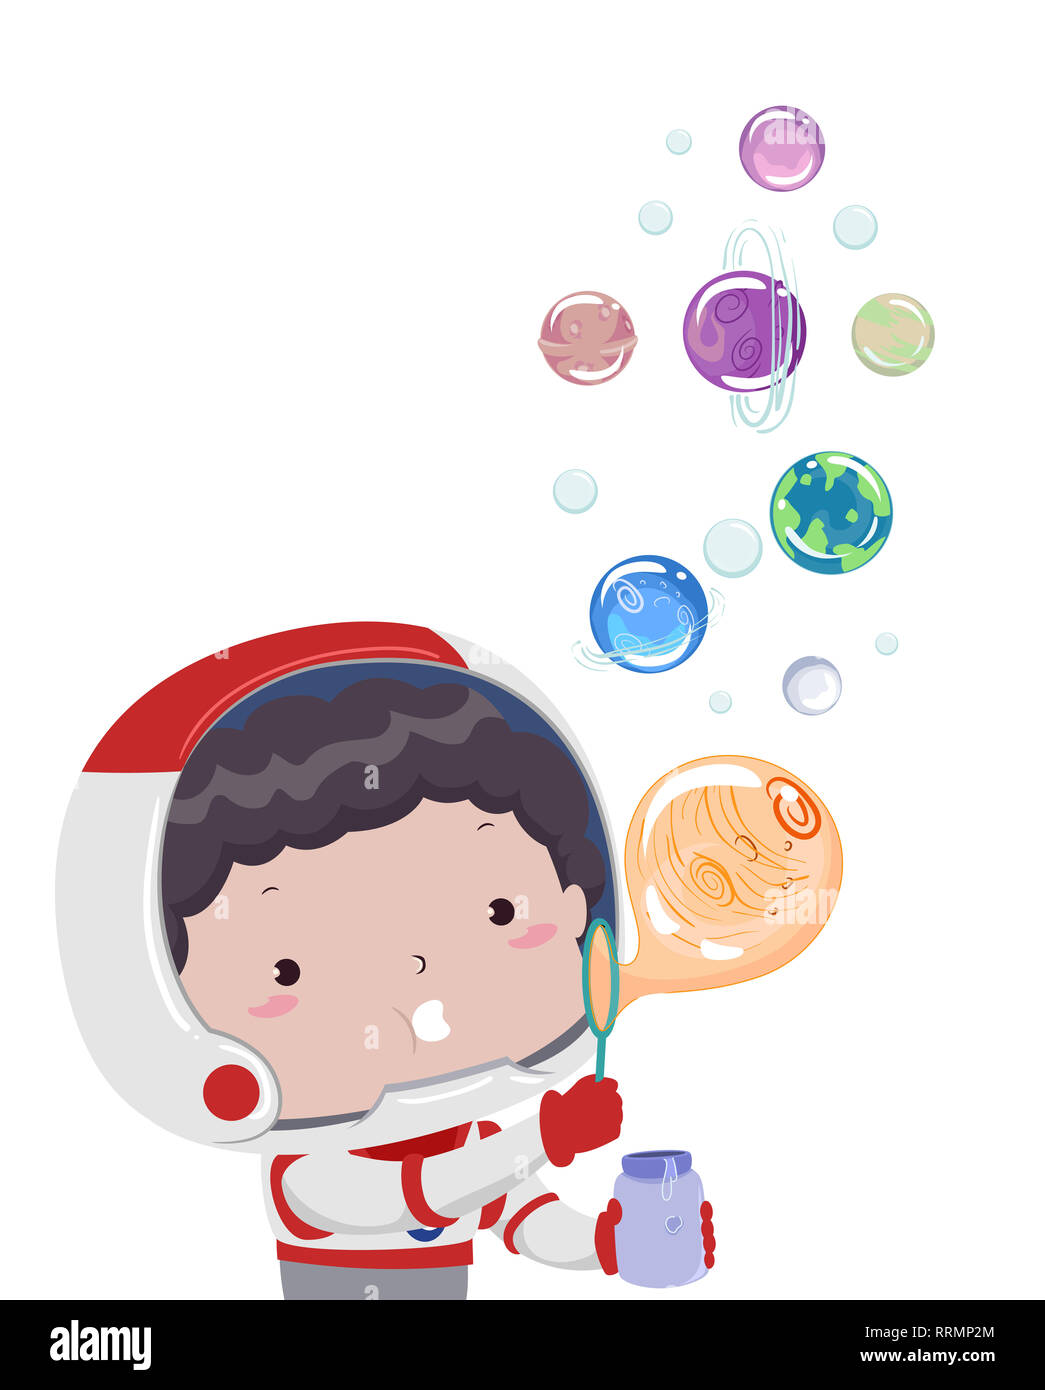 Illustration Of A Kid Boy Astronaut Blowing Bubbles Of Different